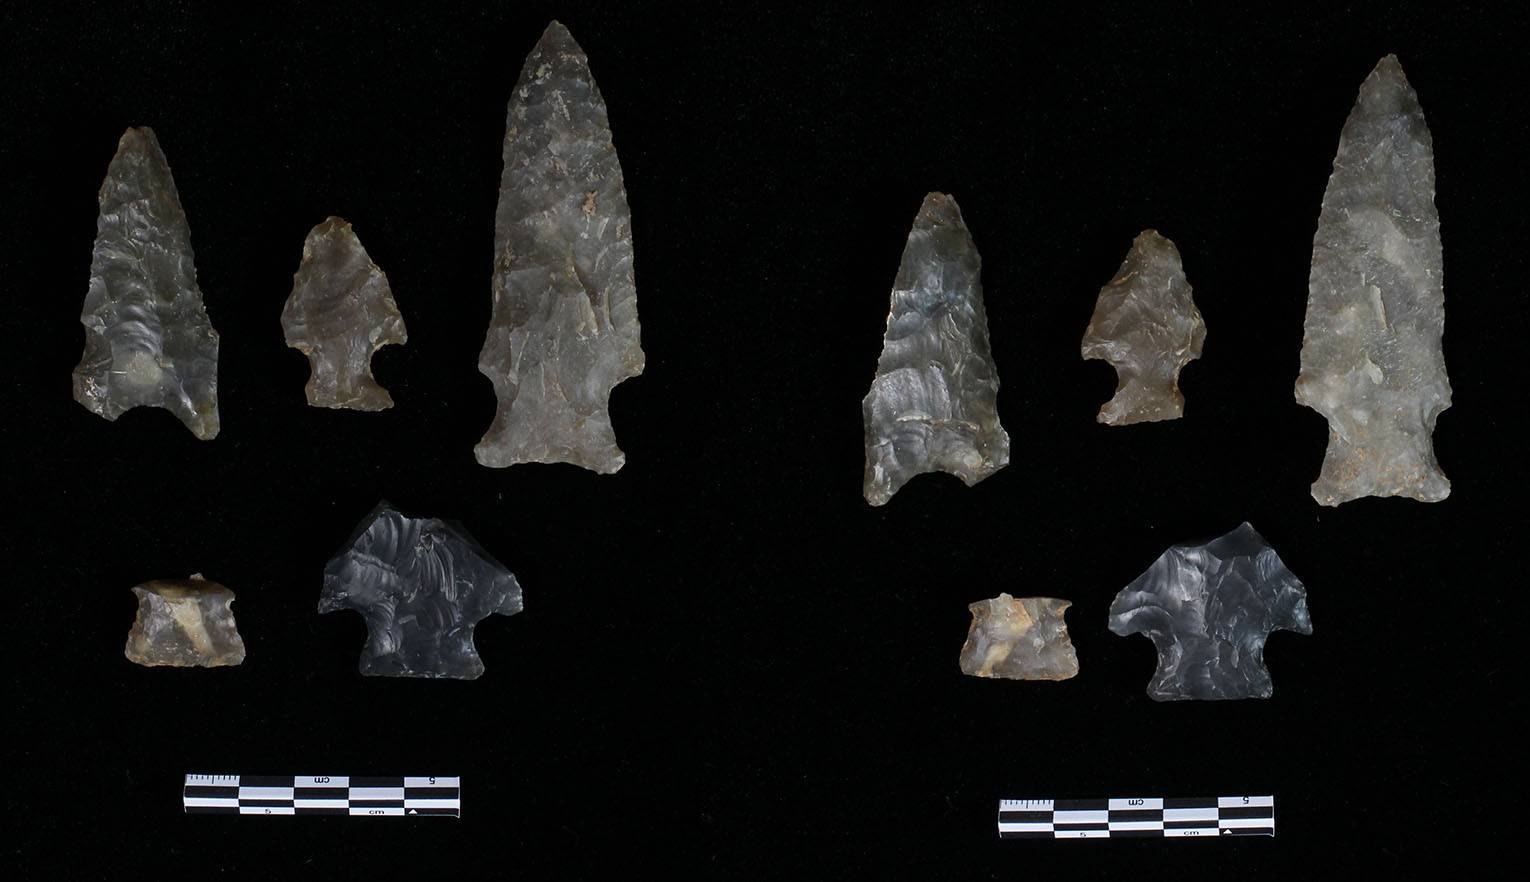 Paleoindian Period: Dart points from 11,500 years ago and earlier